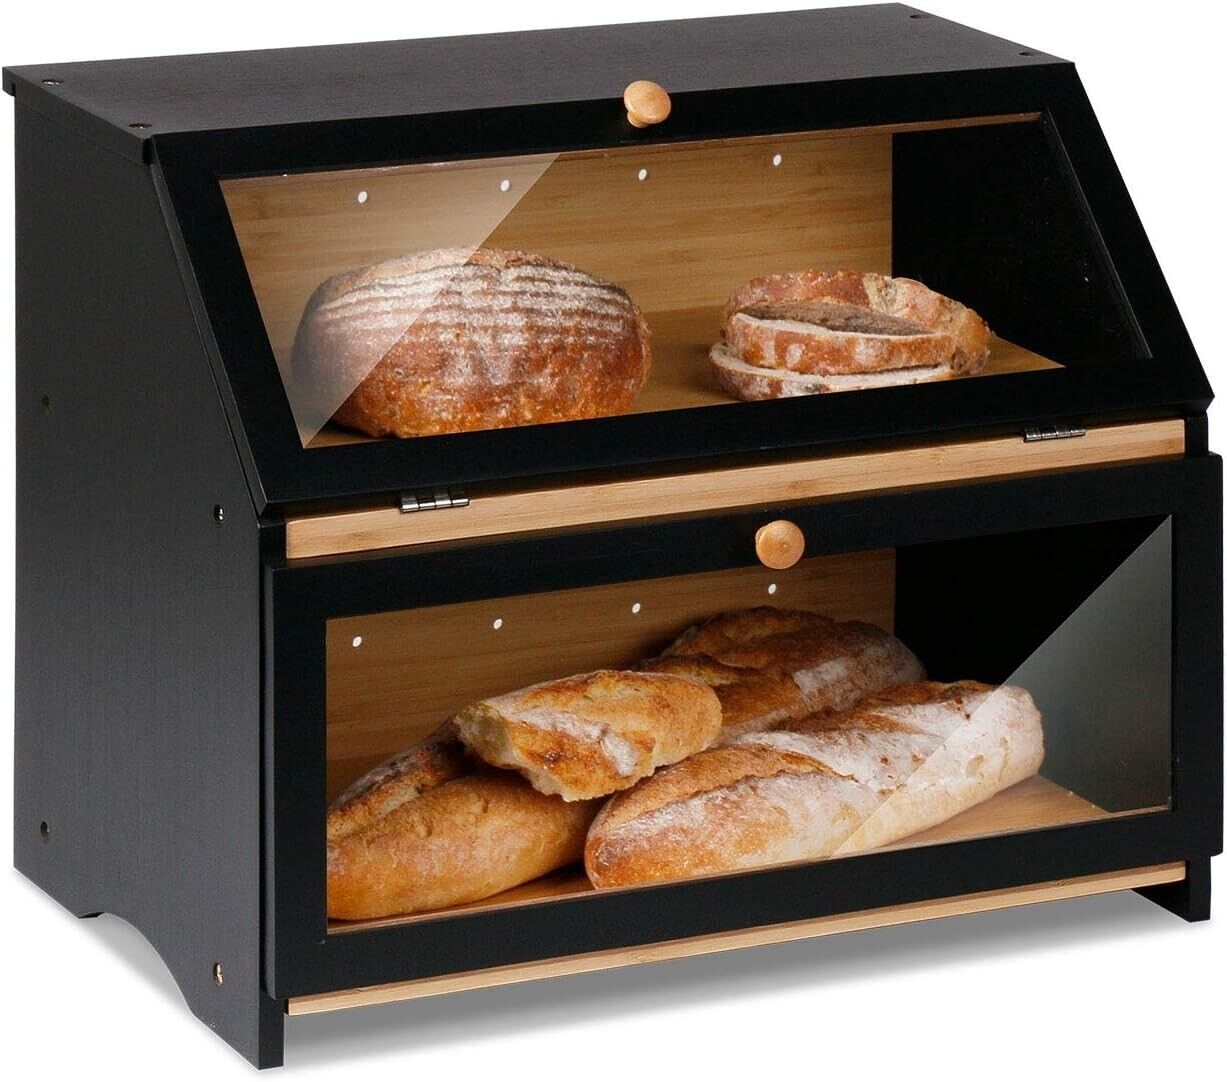 HOMEKOKO Double Layer Large Bread Box for Kitchen Counter, Wooden Large Capacity